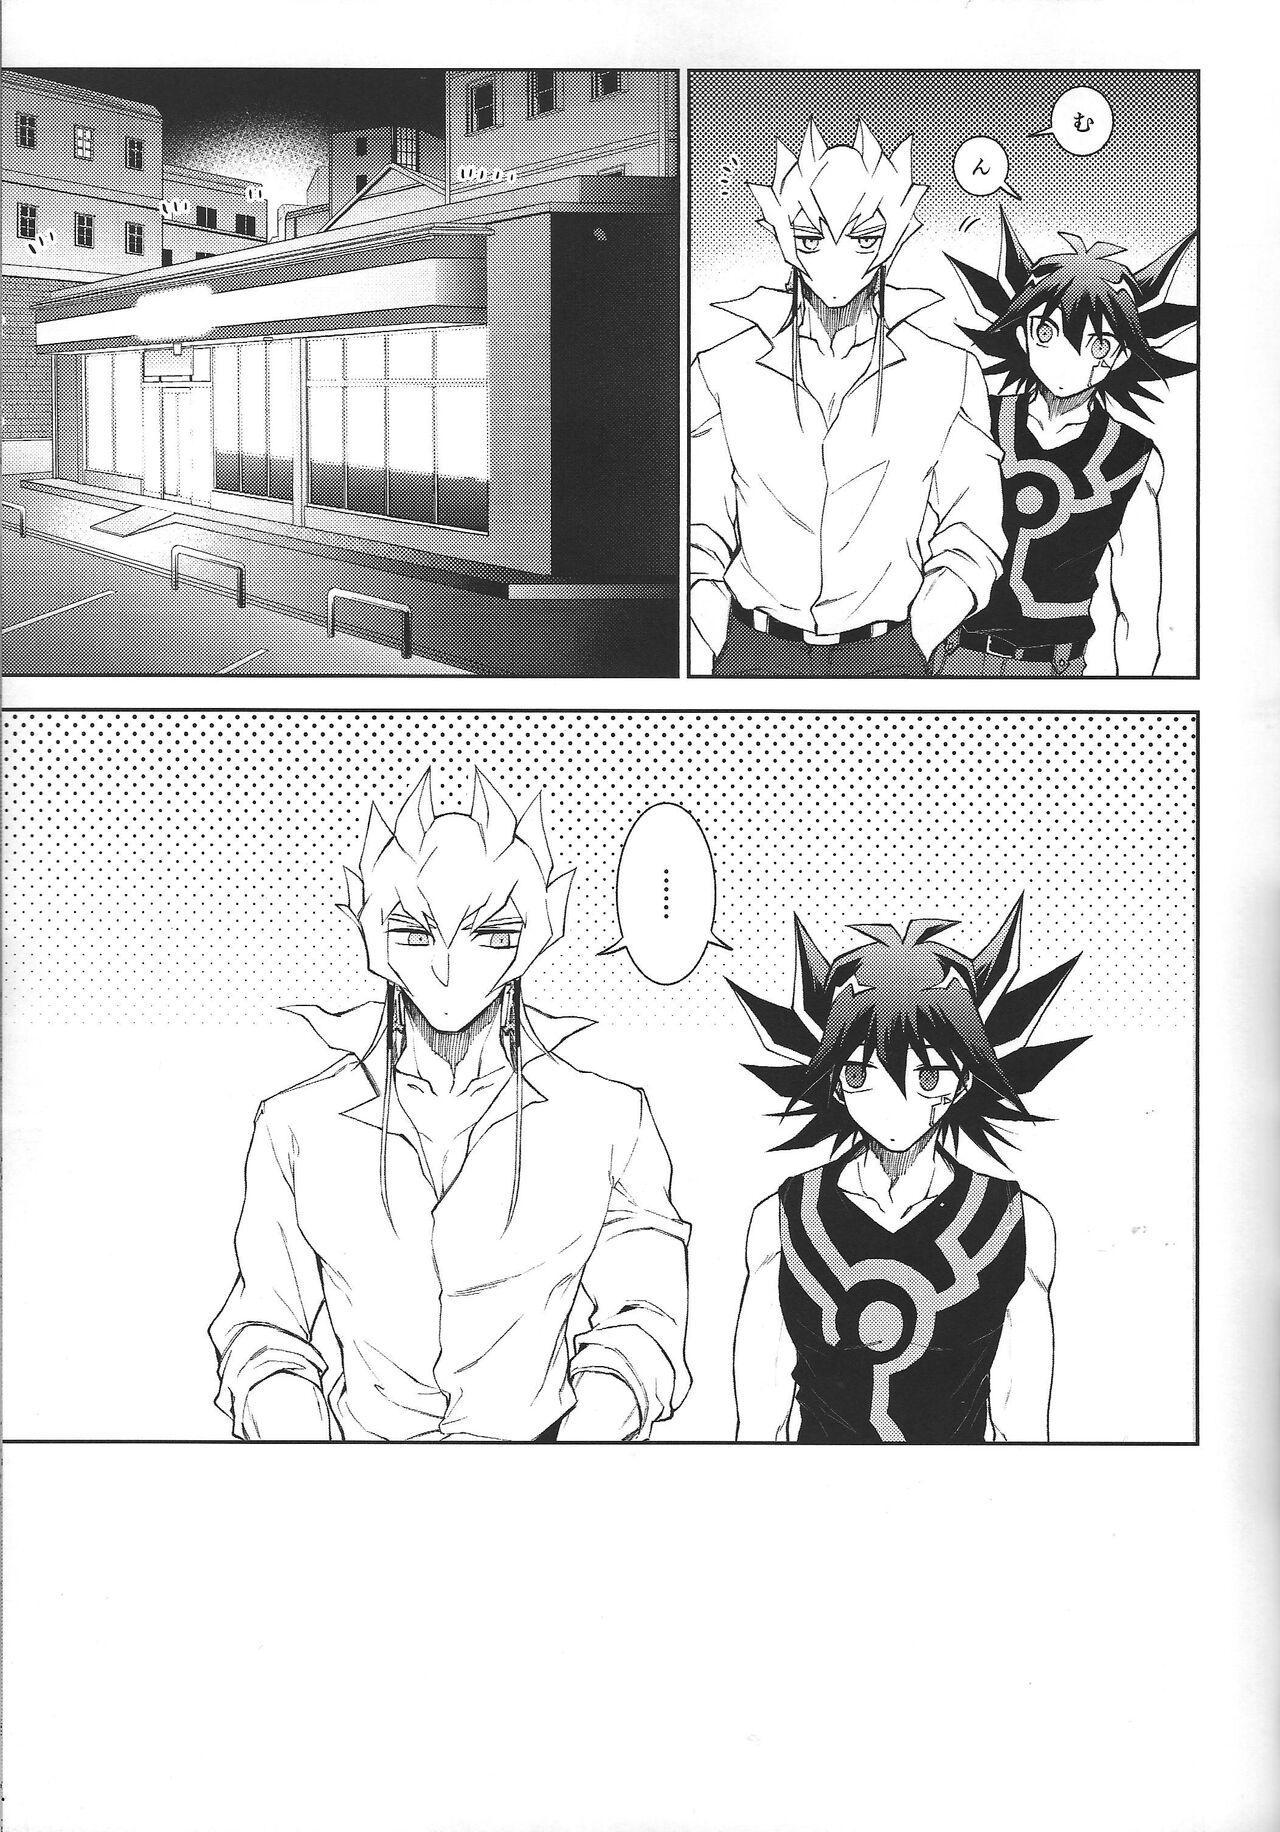 Amazing night mischief - Yu gi oh 5ds Candid - Page 6